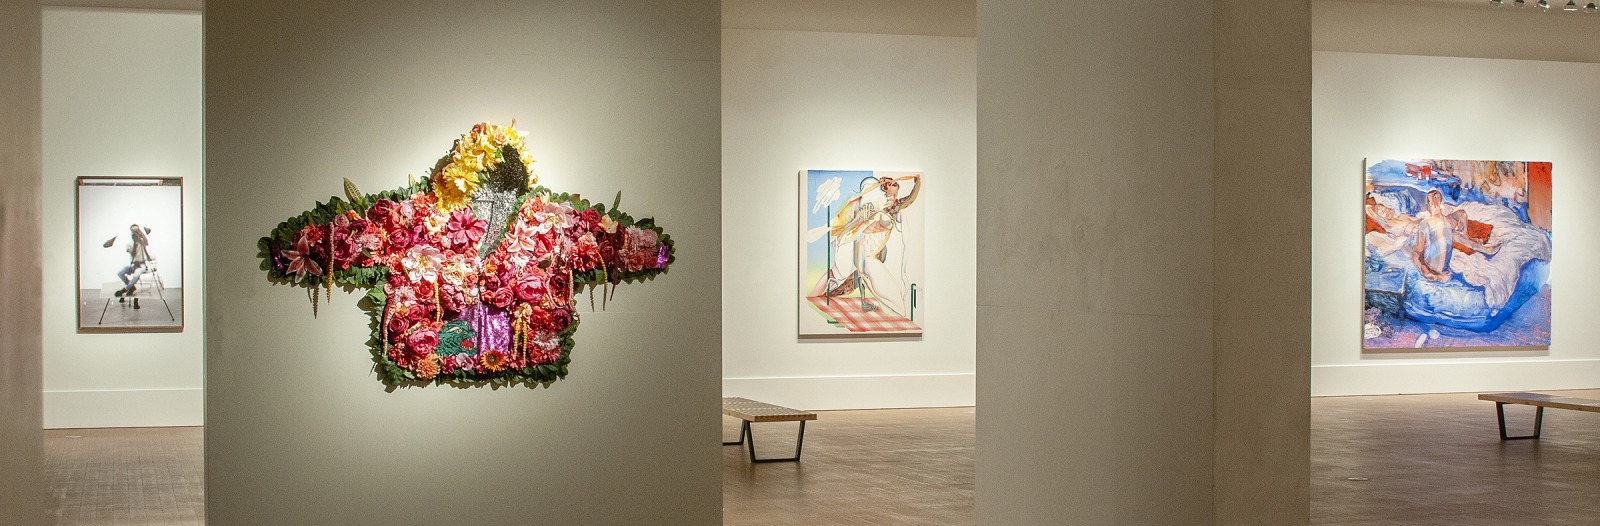 Installation view of Devan Shimoyama's "Untitled (For Trayvon)", a hoopie covered in flowers.